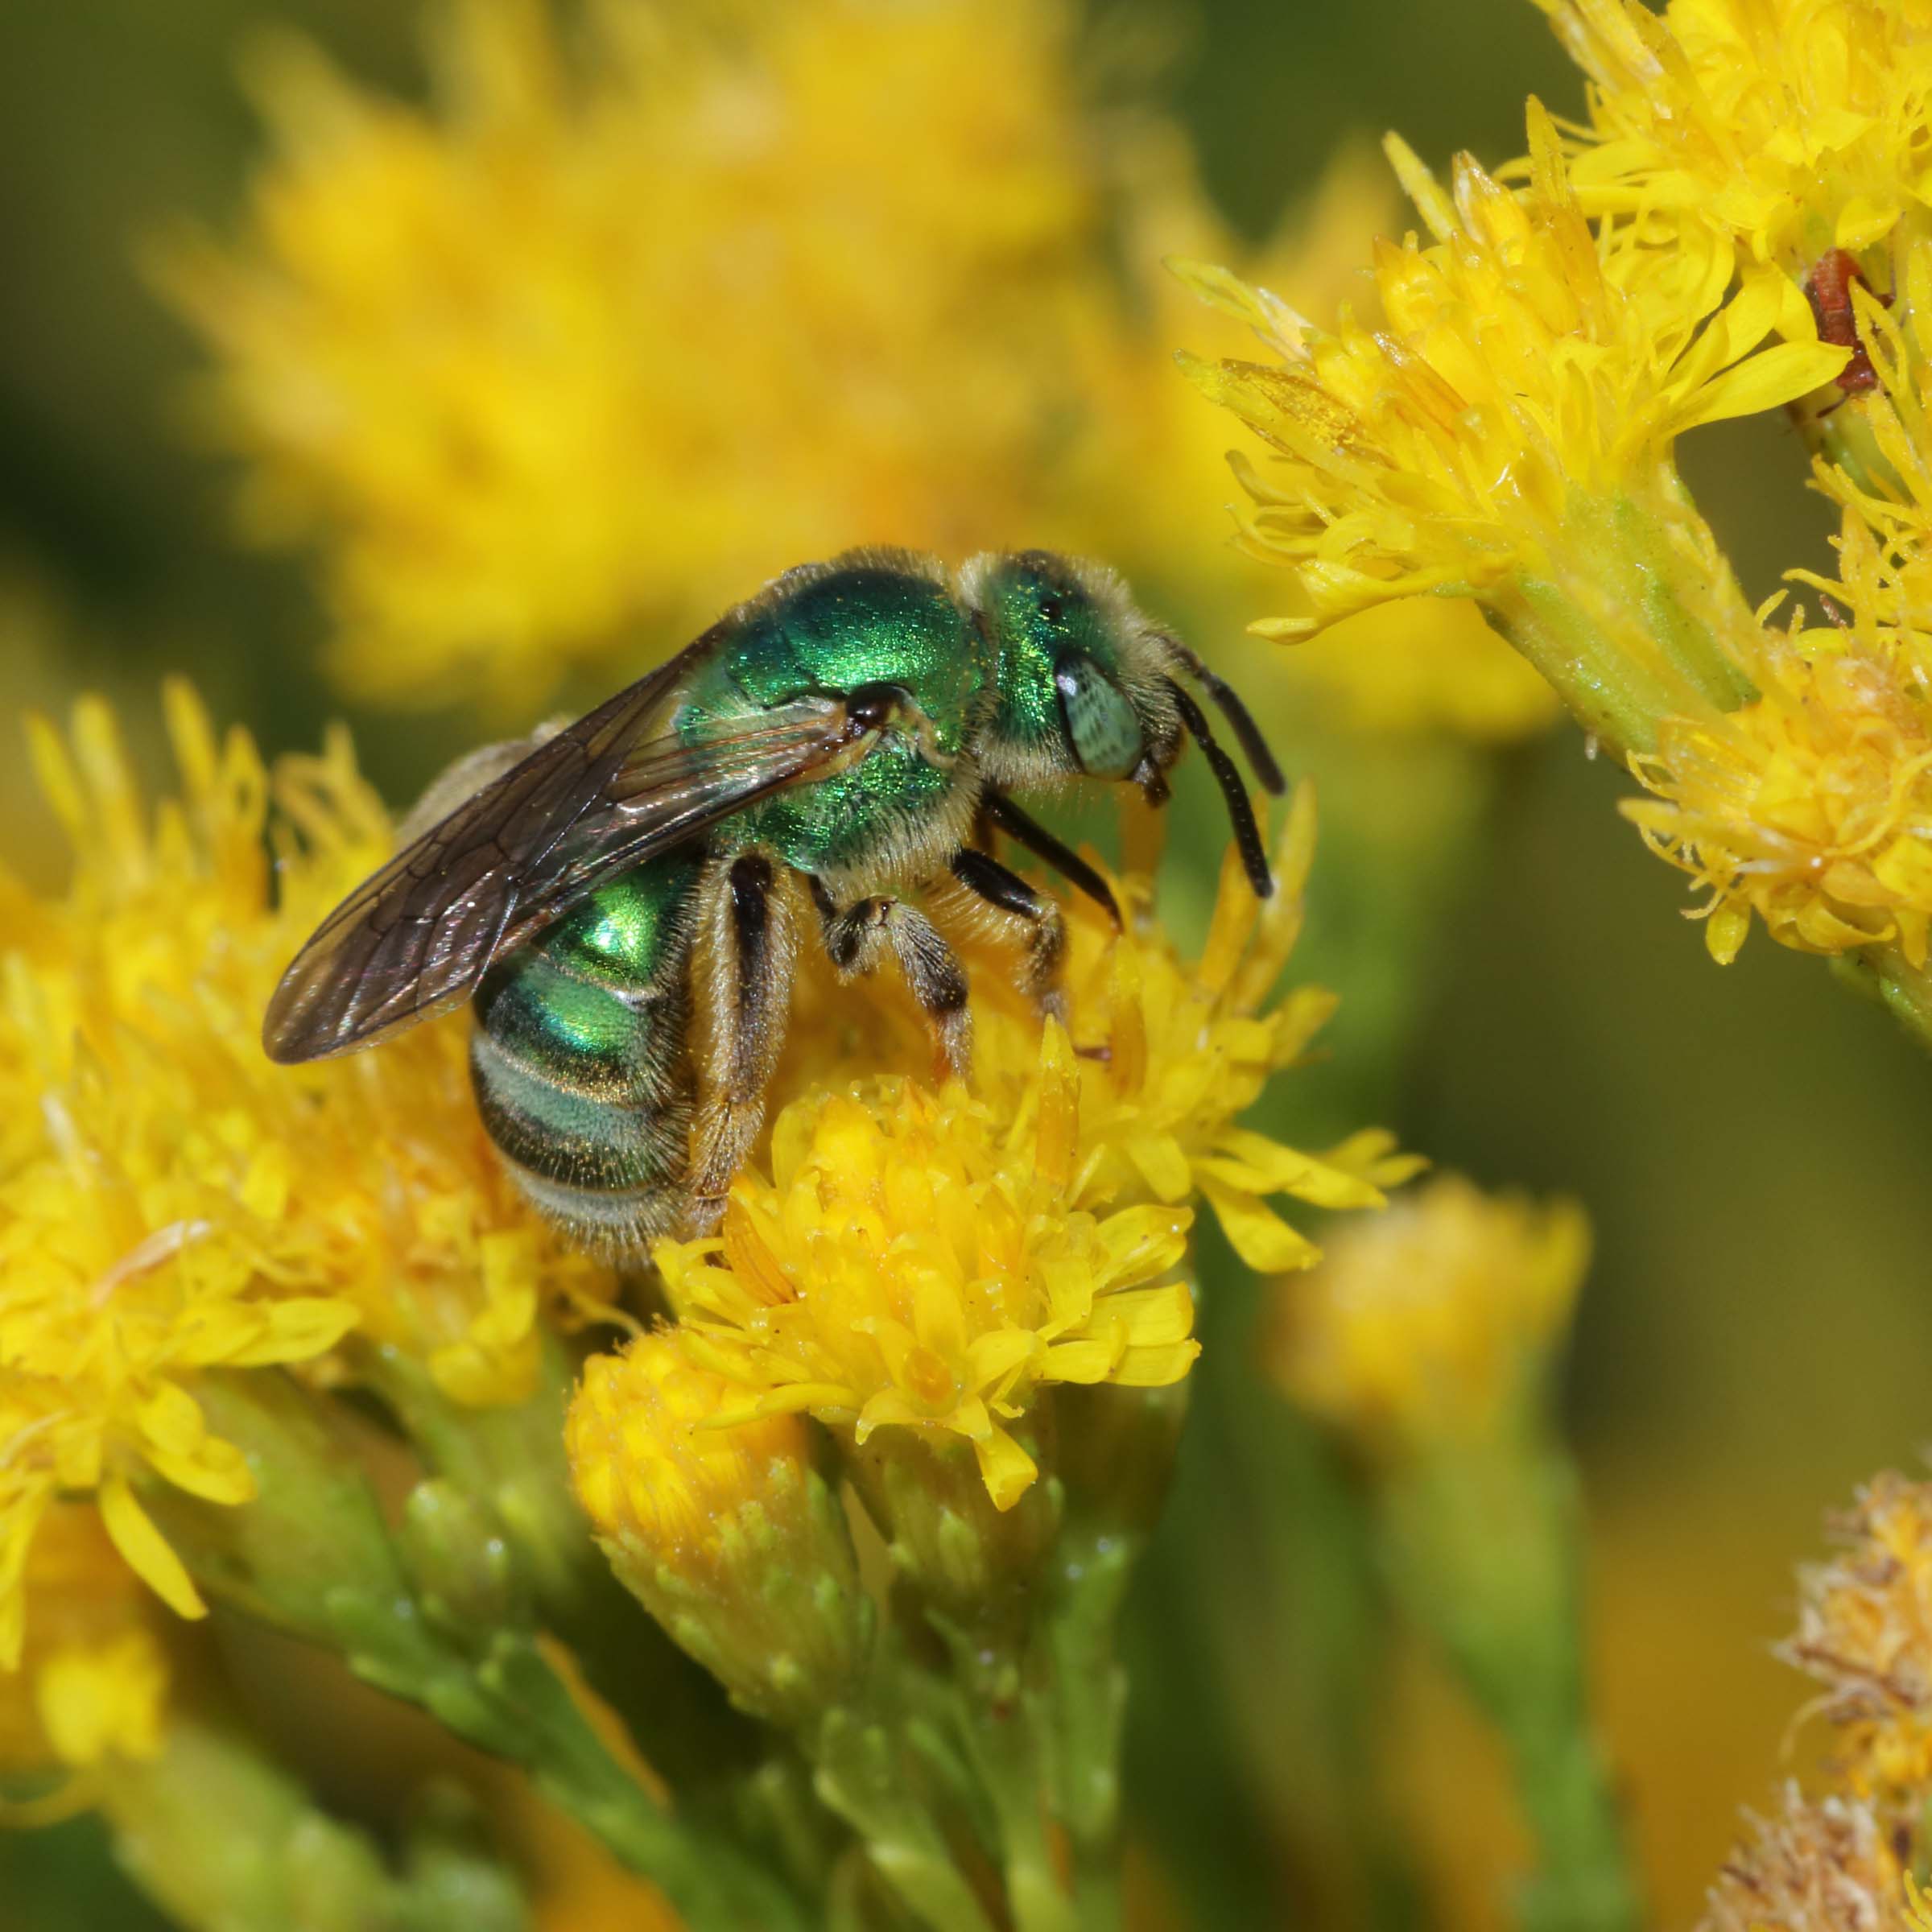 A green bee on a yellow flower